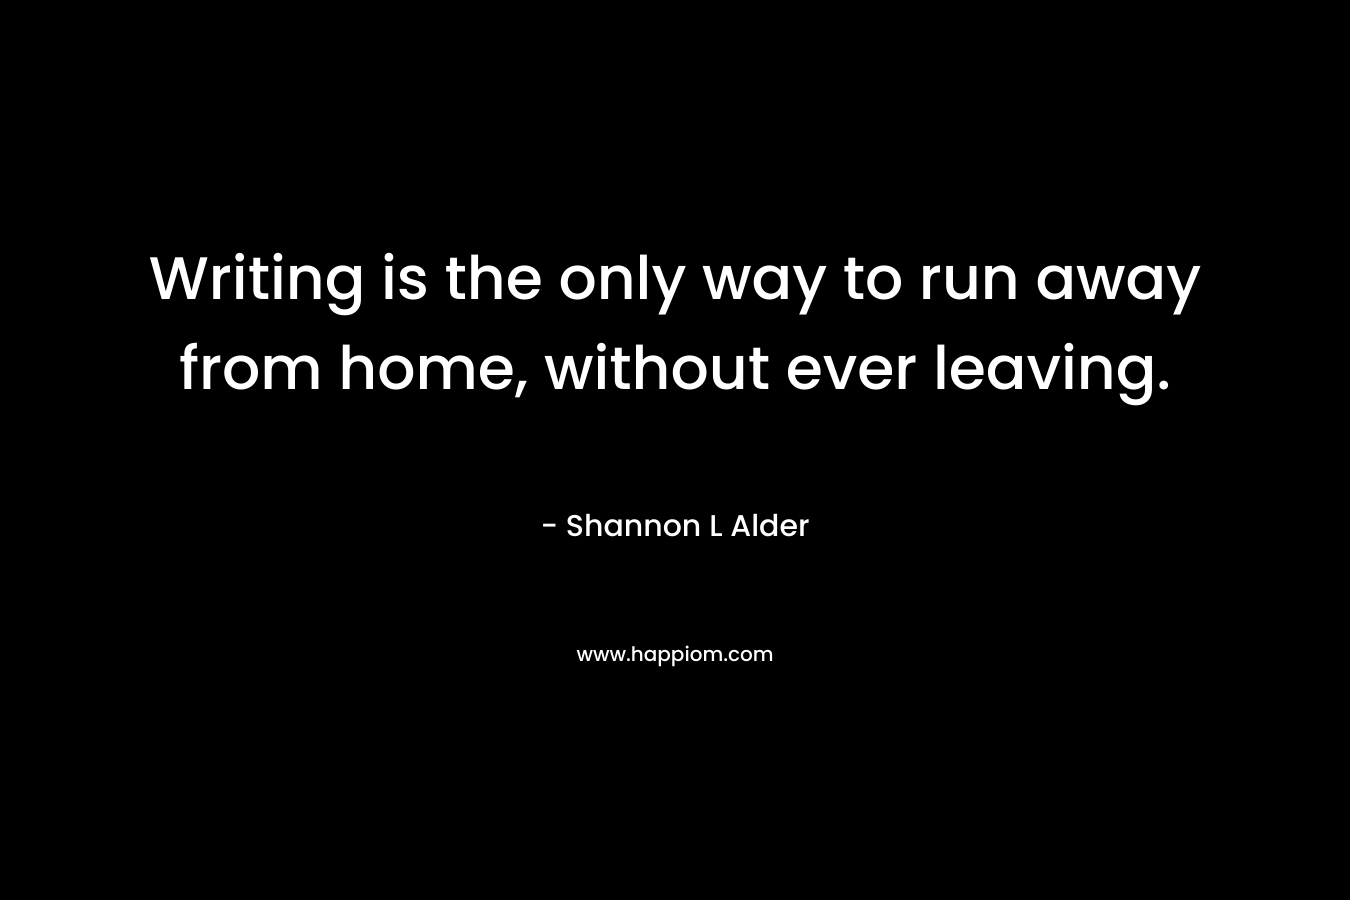 Writing is the only way to run away from home, without ever leaving.